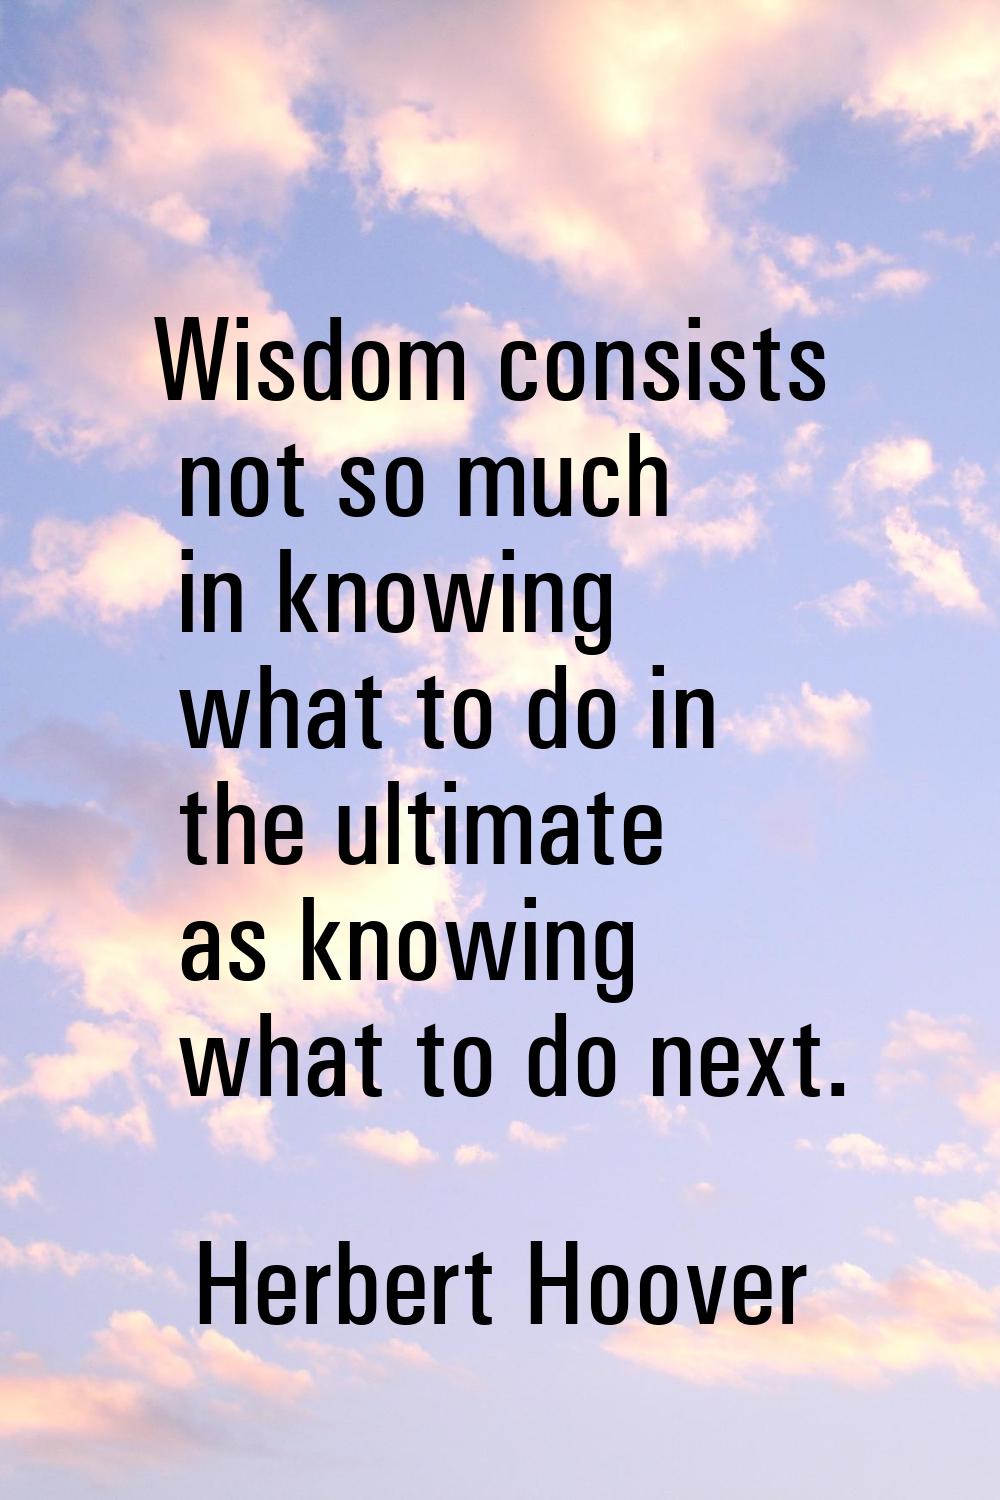 Wisdom consists not so much in knowing what to do in the ultimate as knowing what to do next.